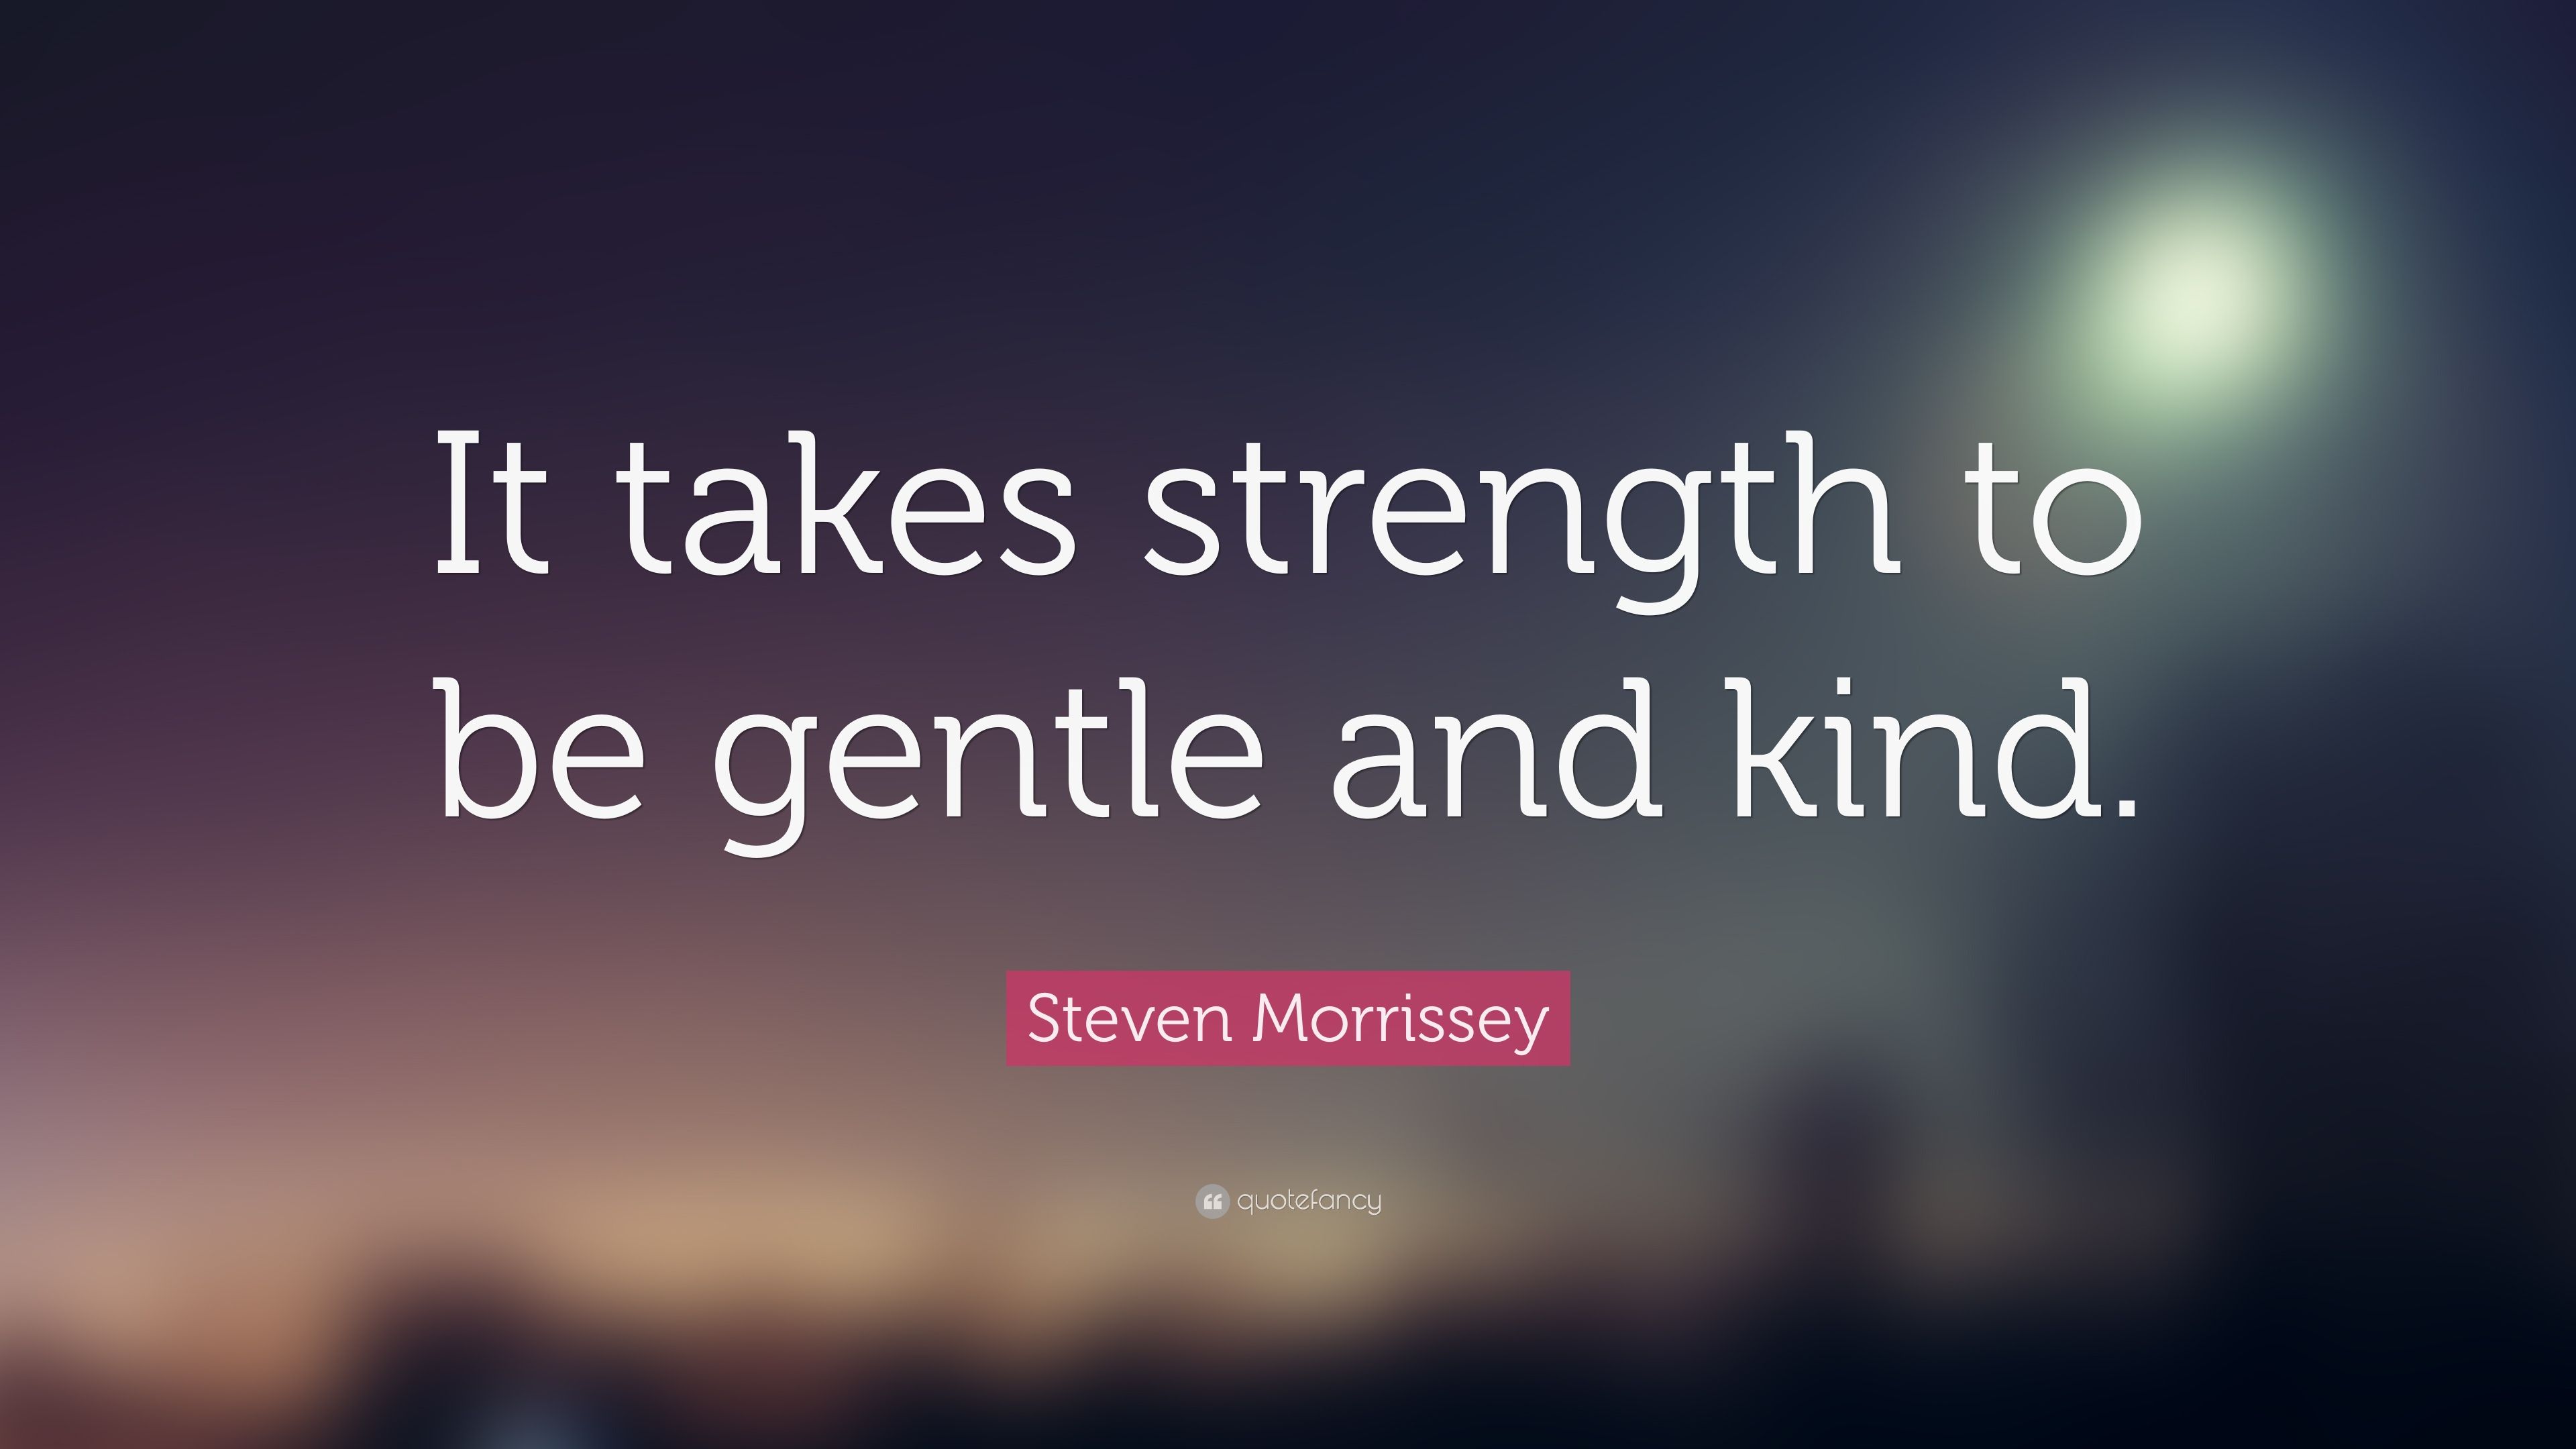 Steven Morrissey Quote: “It takes strength to be gentle and kind.” (12 wallpaper)